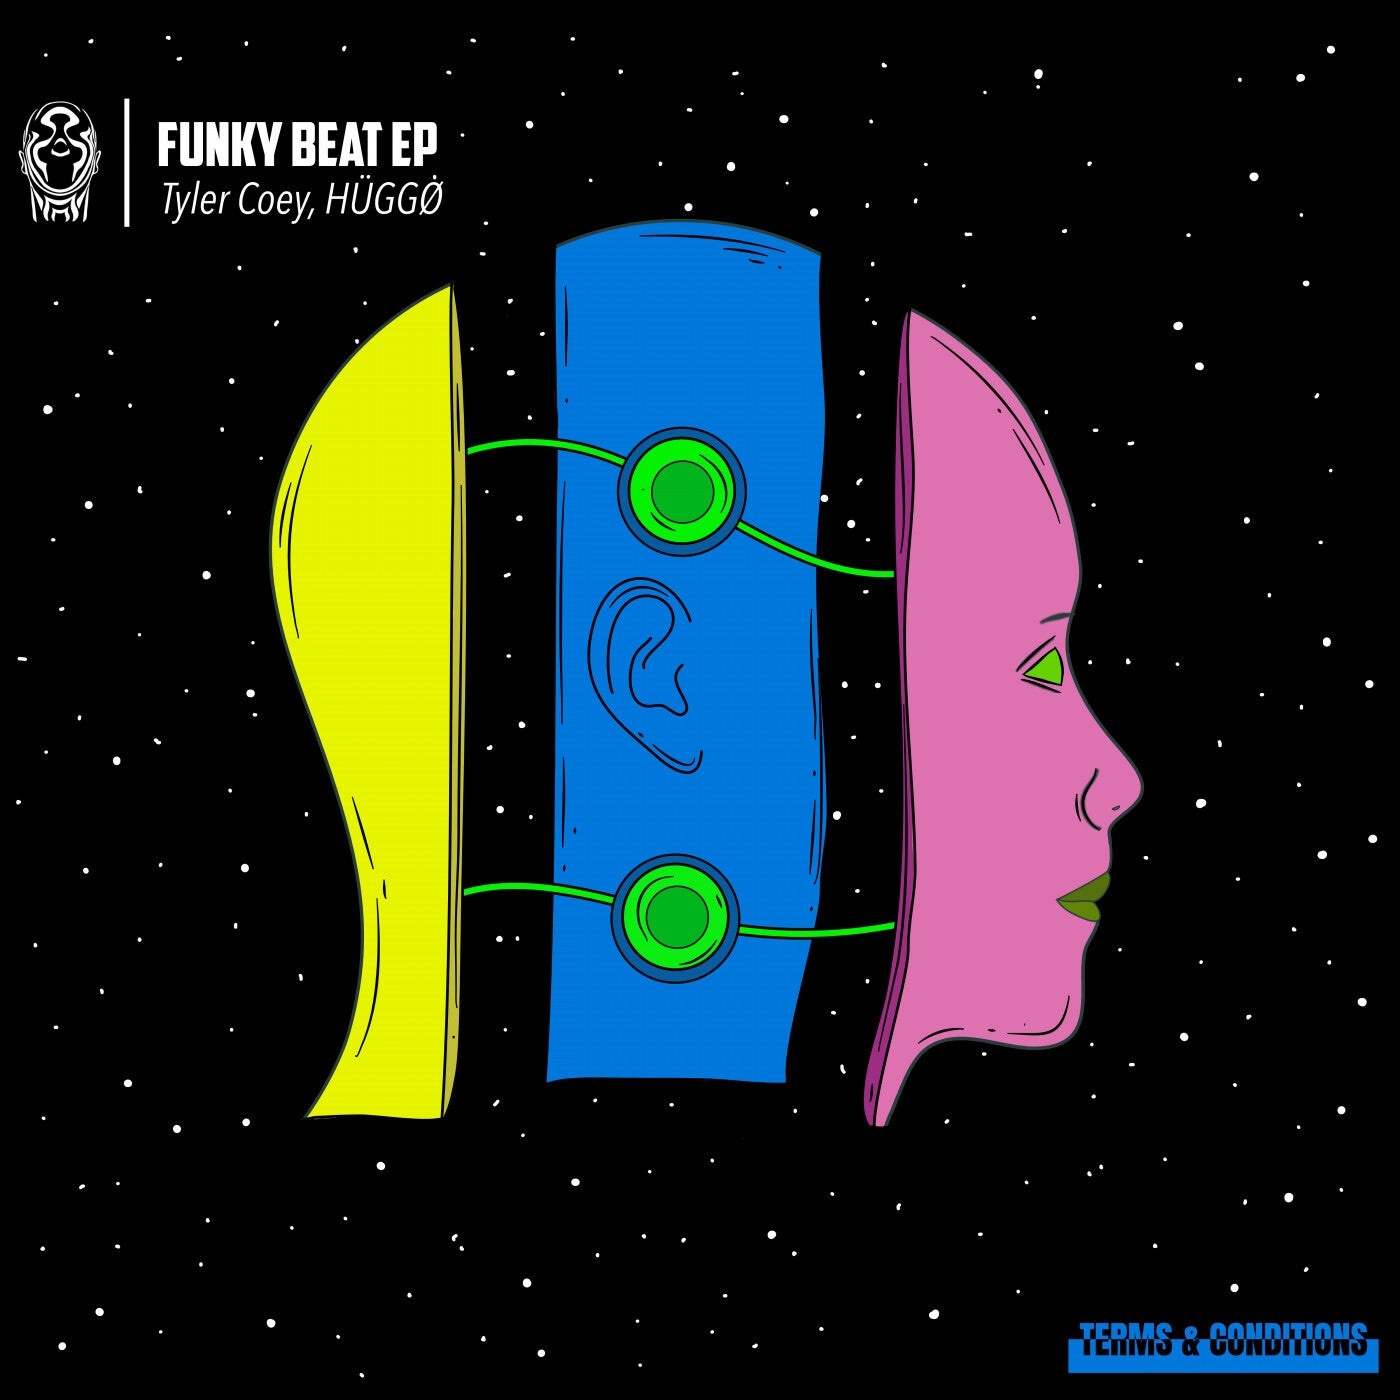 image cover: Tyler Coey, HÜGGØ - Funky Beat EP / TNCR044